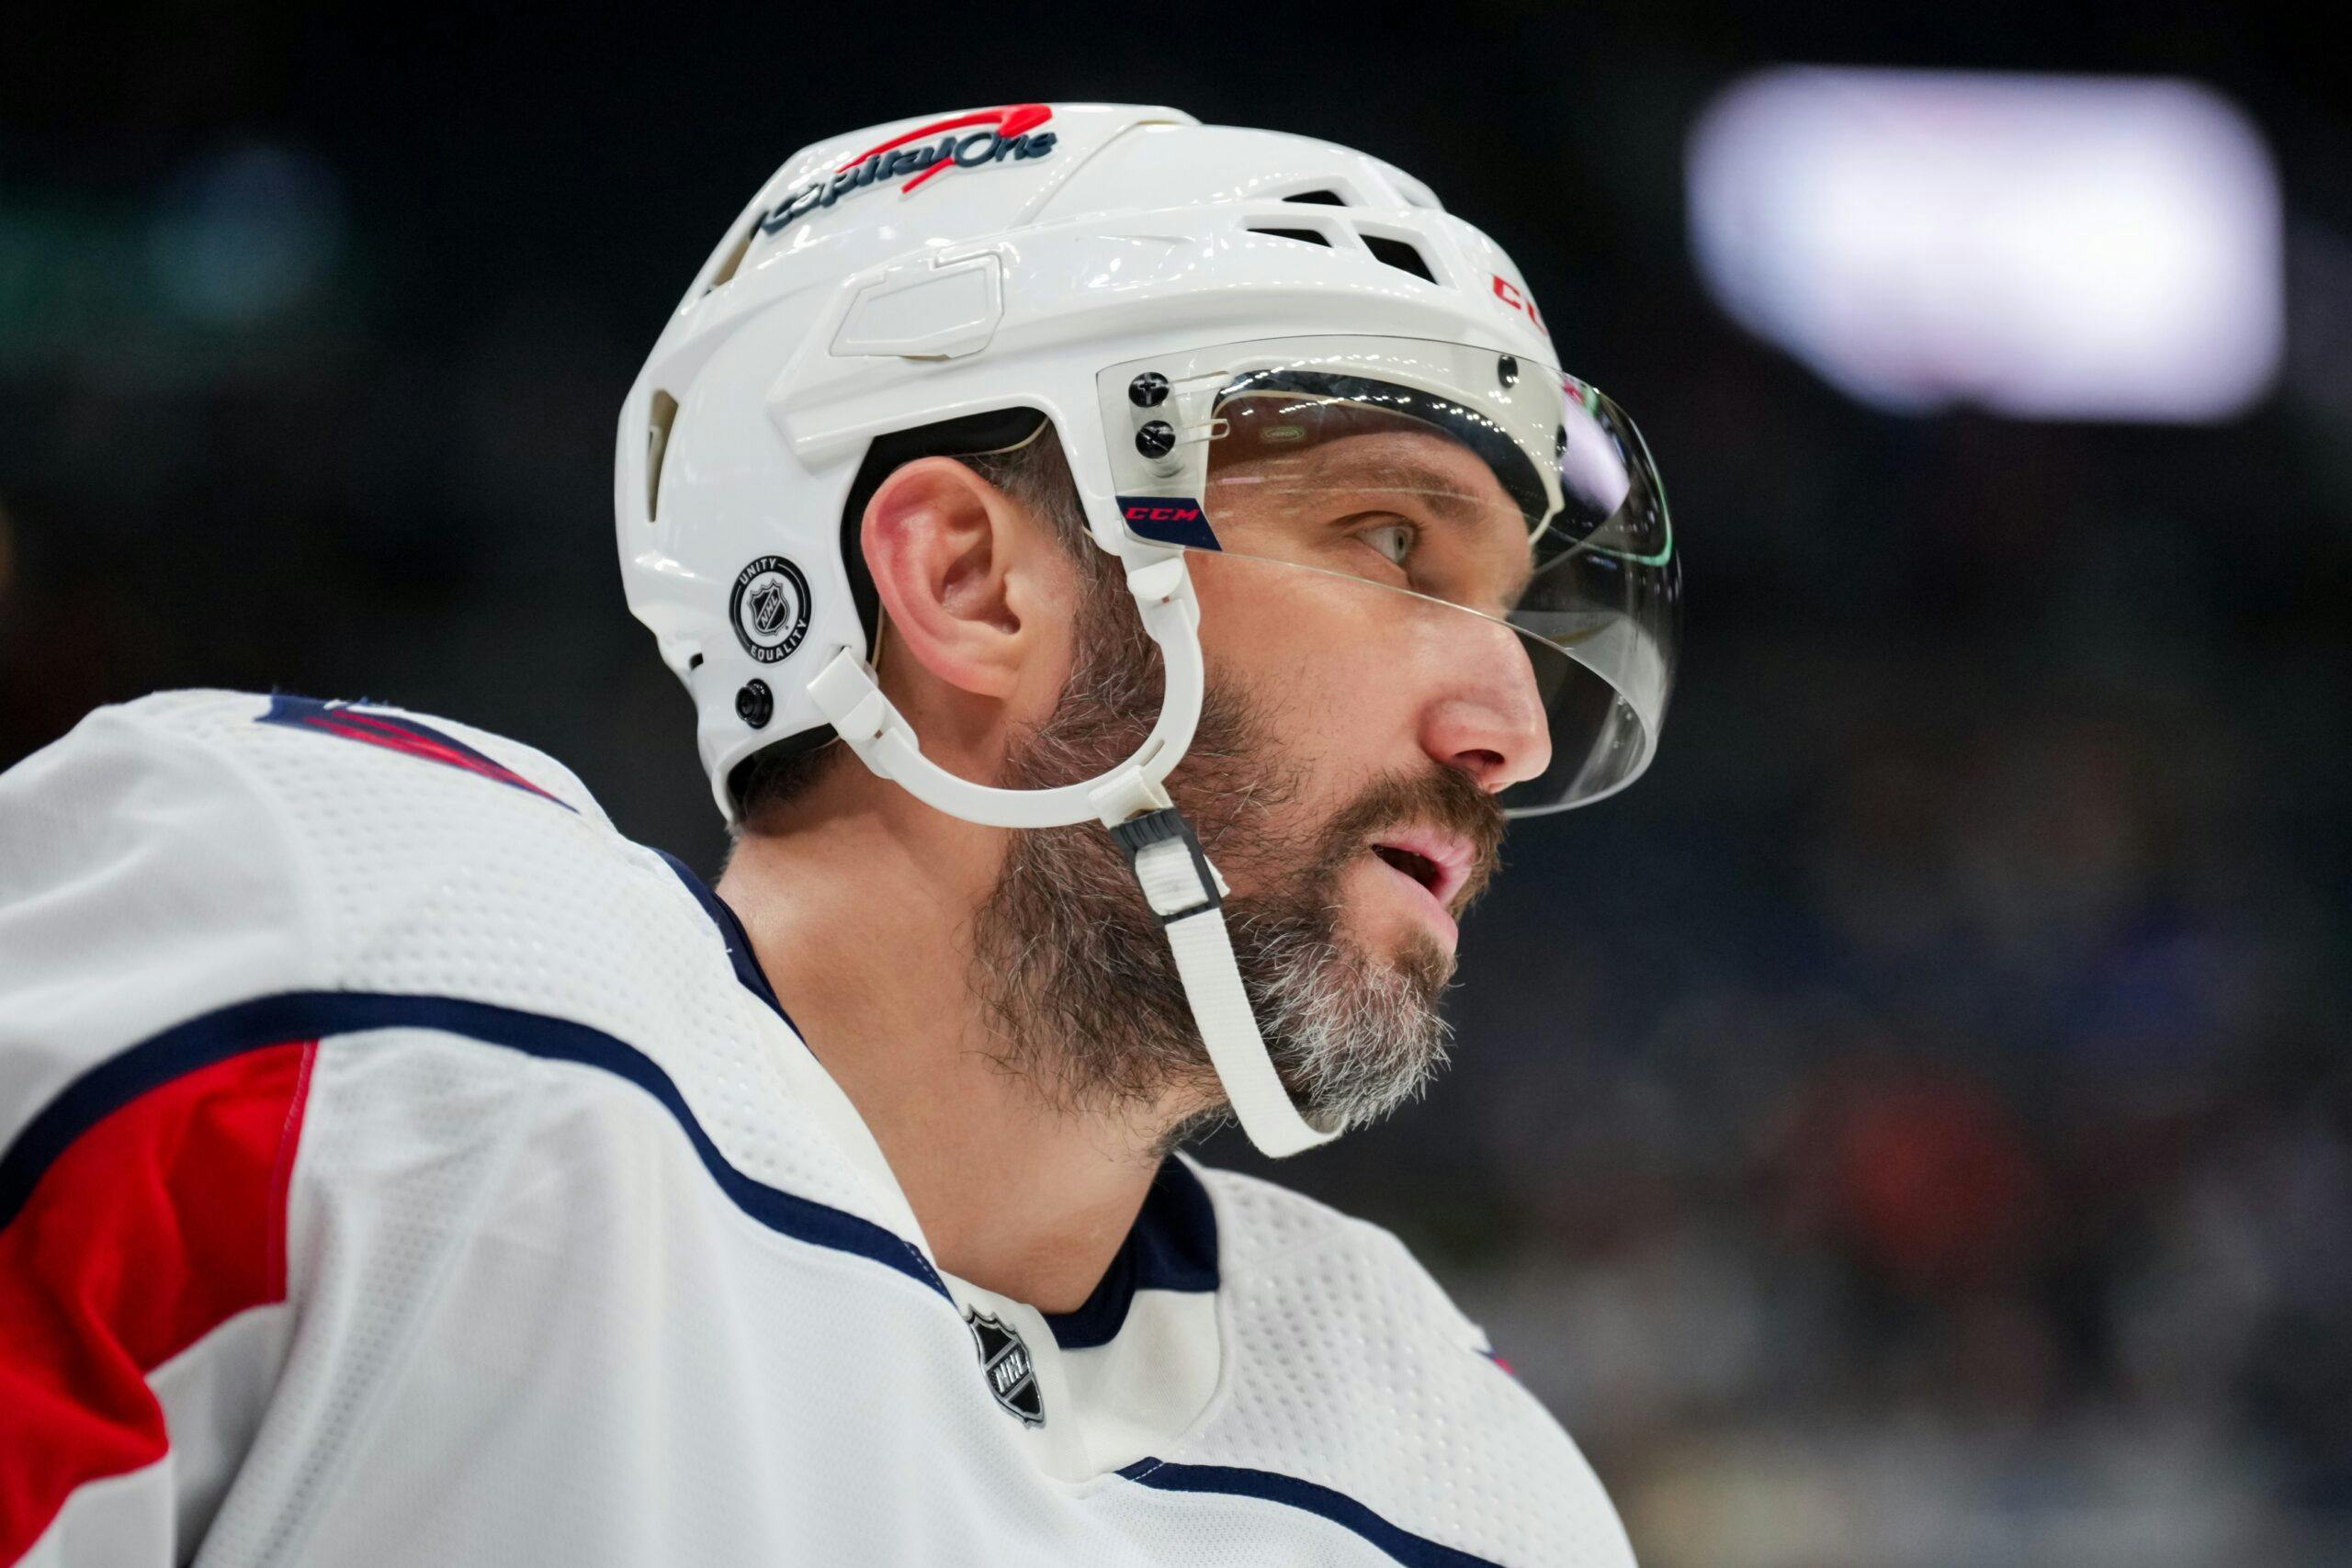 It’s panic time for Alex Ovechkin and the struggling Washington Capitals